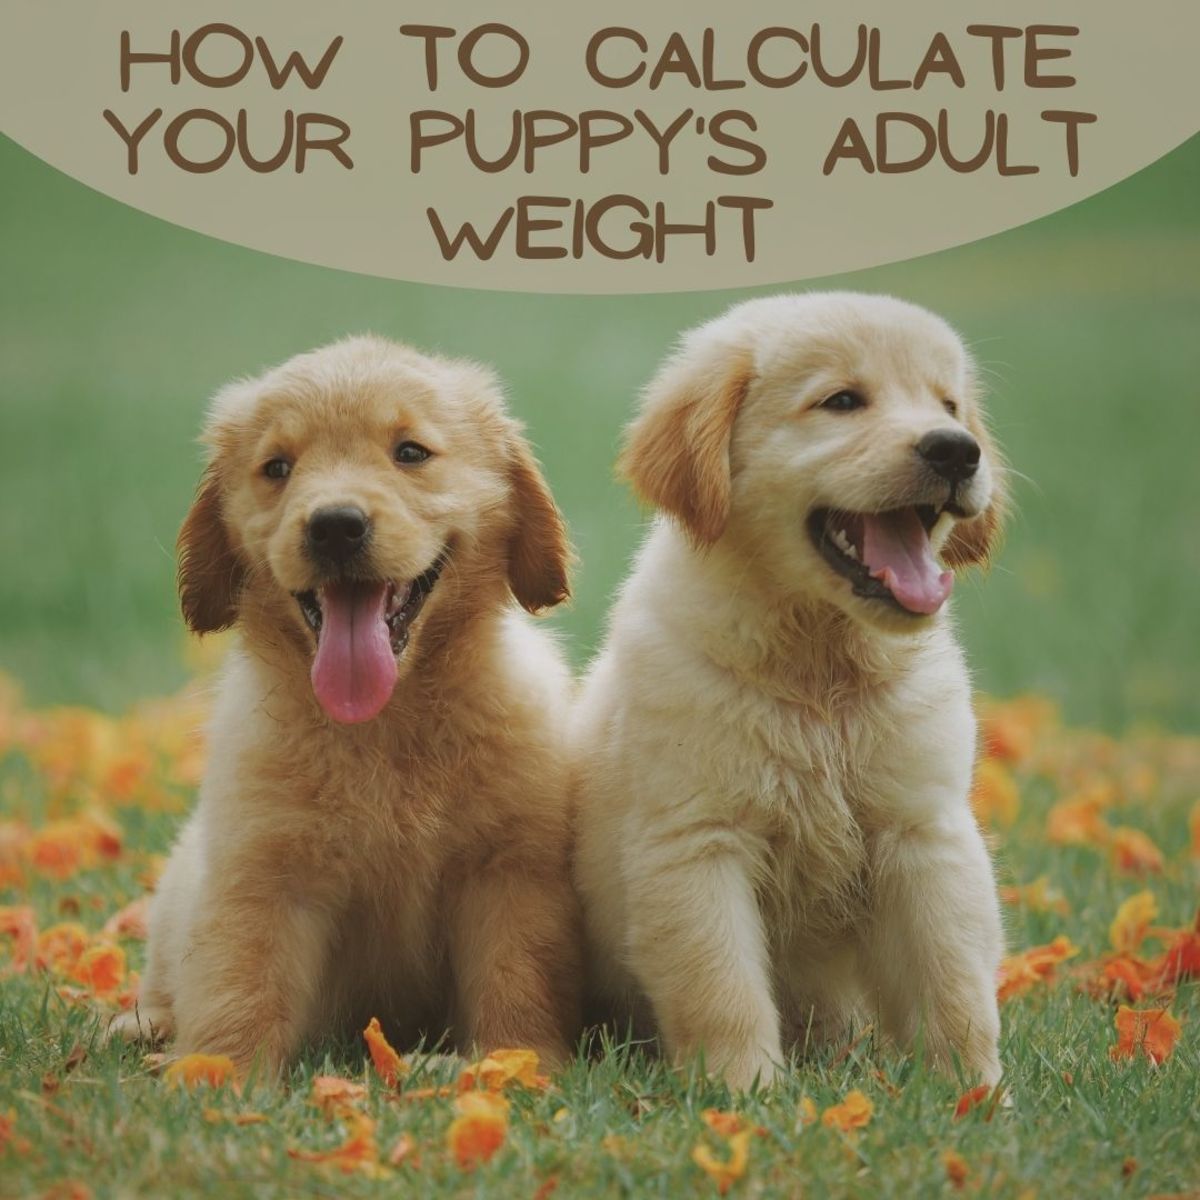 How much will your puppy weigh when it grows up?